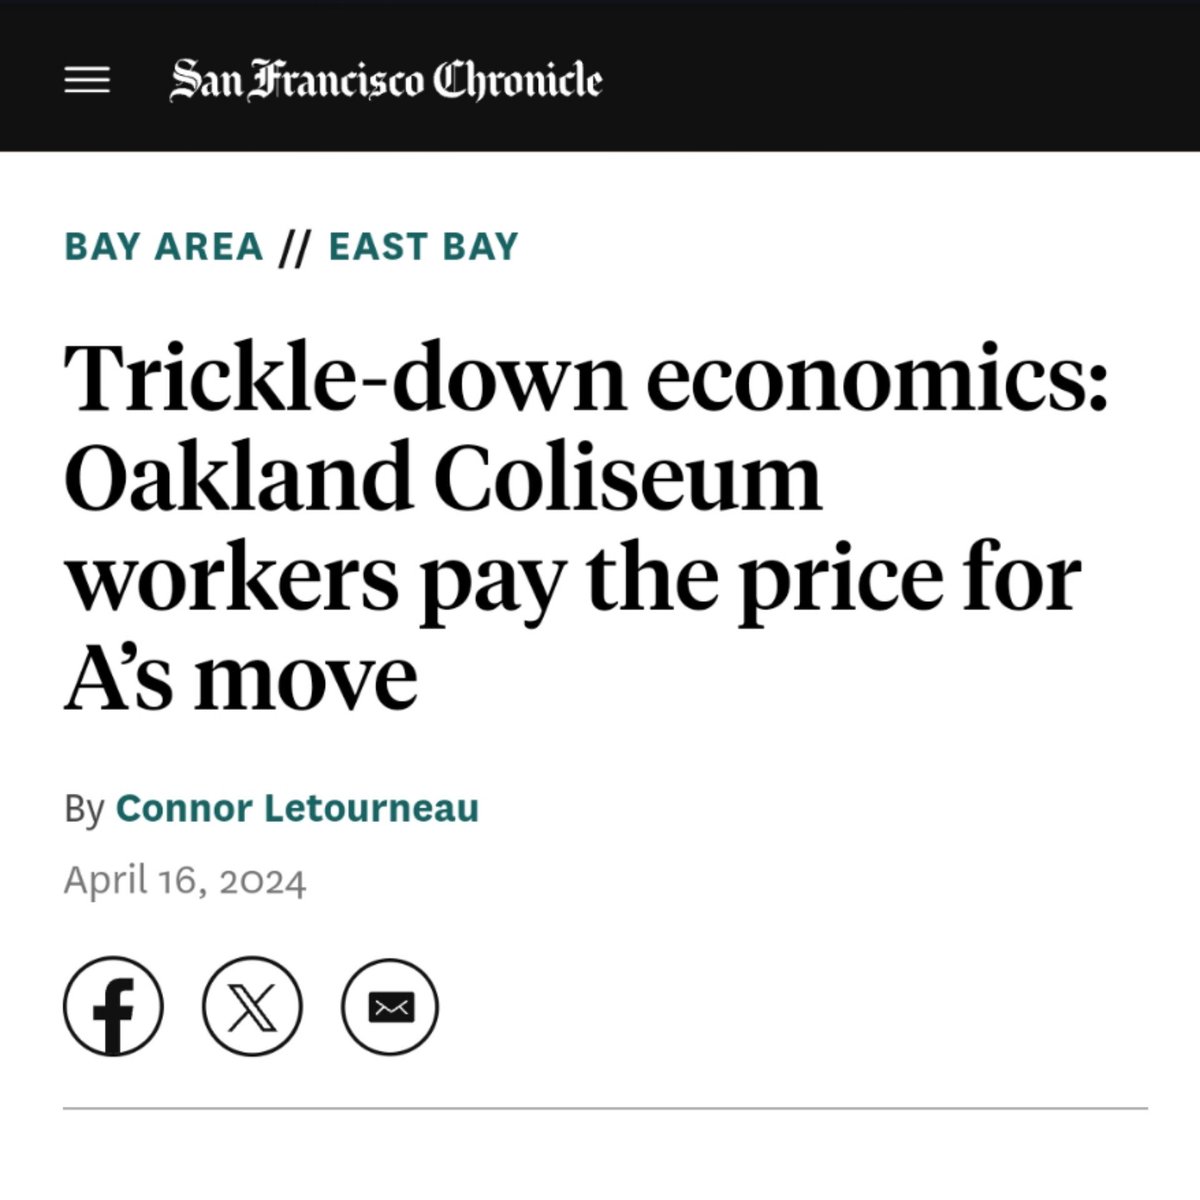 Local 2 members at the Oakland Coliseum are speaking up about the imminent threat of job-loss with little to no support. Shame on John Fisher and the MLB for abandoning hundreds of loyal food service workers! Read more: sfchronicle.com/eastbay/articl…